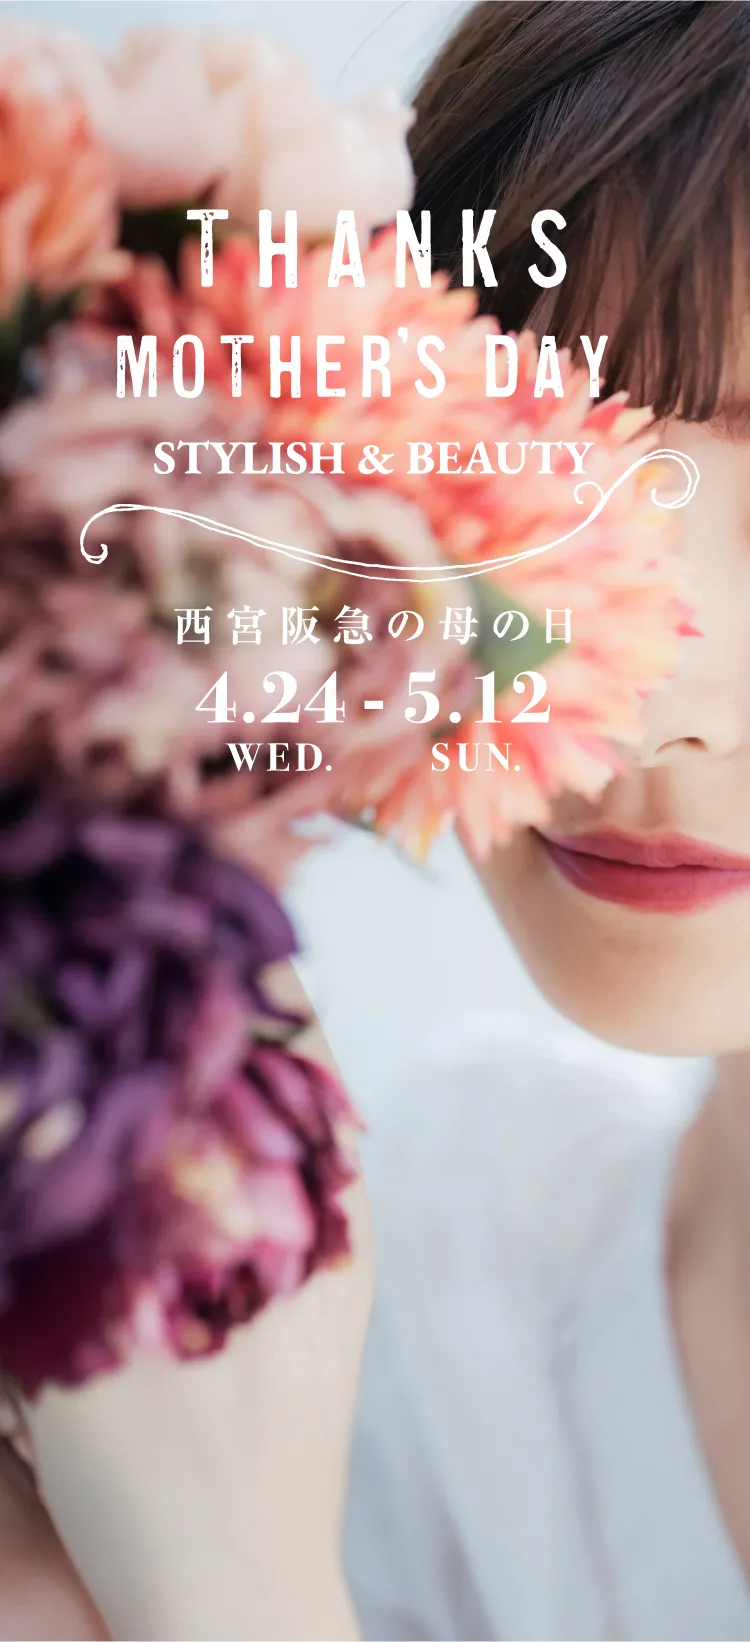 THANKS MOTHER'S DAY stylish & beauty 西宮阪急の母の日 4.24 WED. - 5.12 SUN.